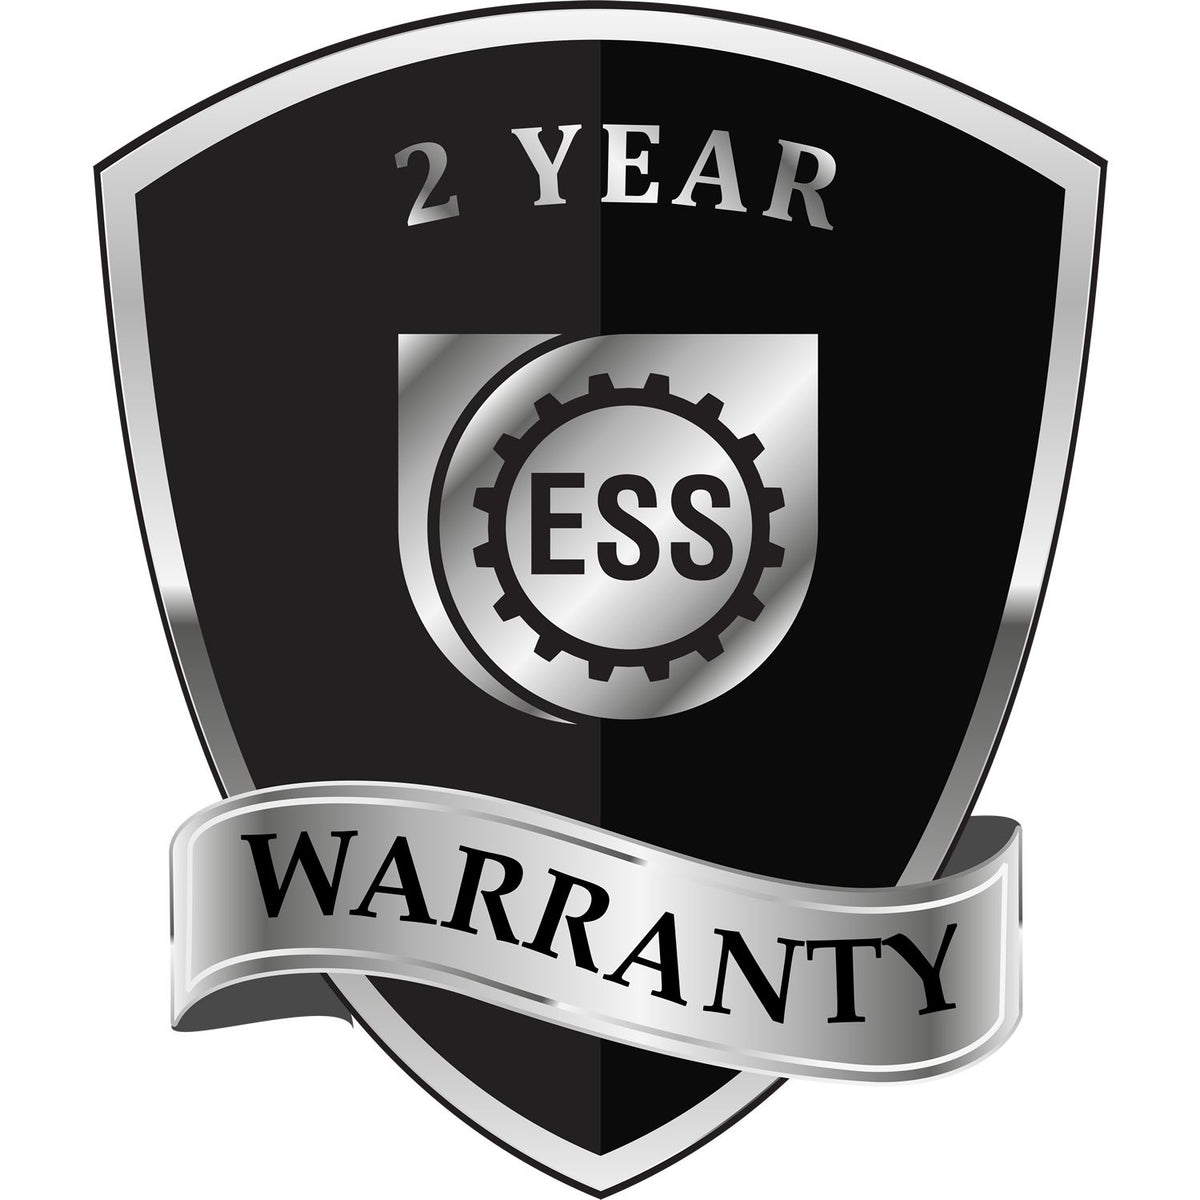 A badge or emblem showing a warranty icon for the Heavy Duty Cast Iron Oklahoma Architect Embosser